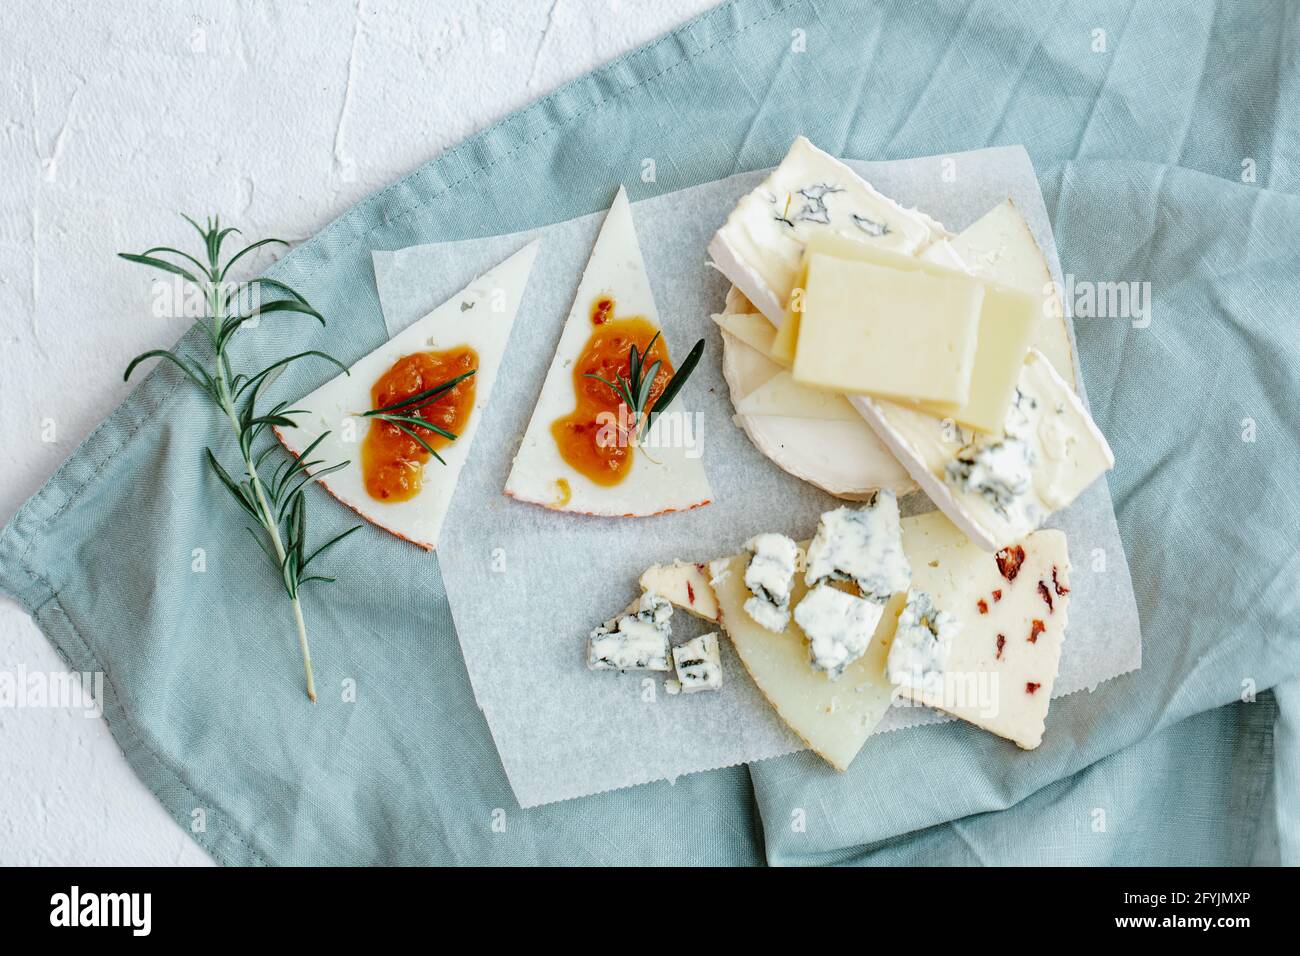 Overhead view of a cheese board with a stack of blue cheese, cheddar, goats cheese and chutney Stock Photo